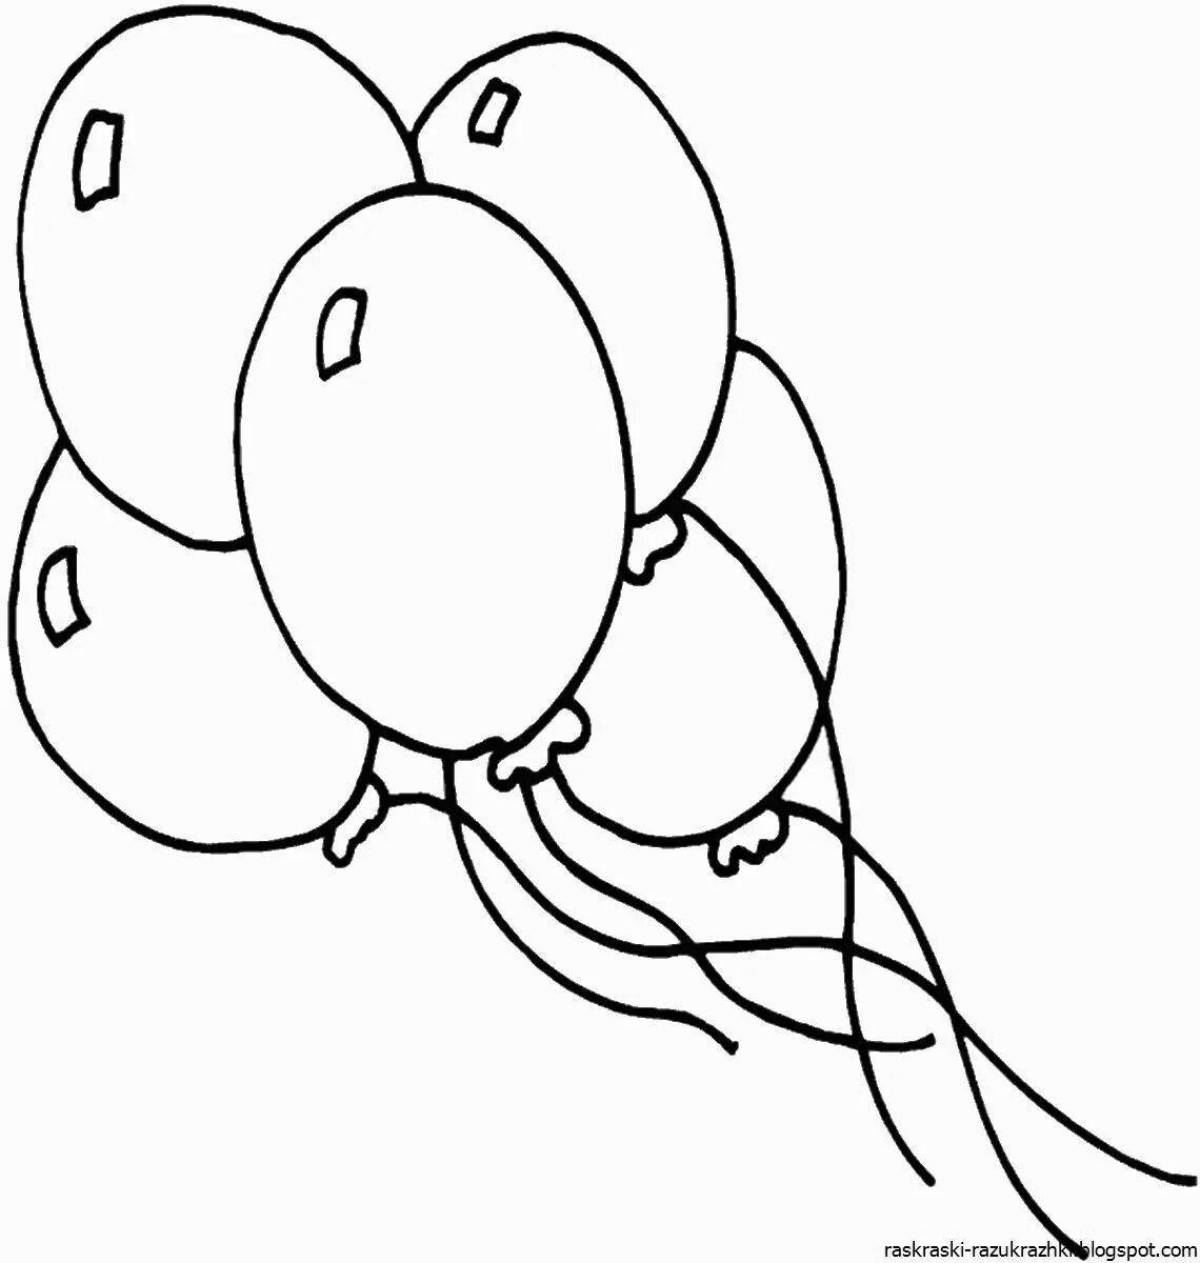 Animated ball coloring page for 4-5 year olds